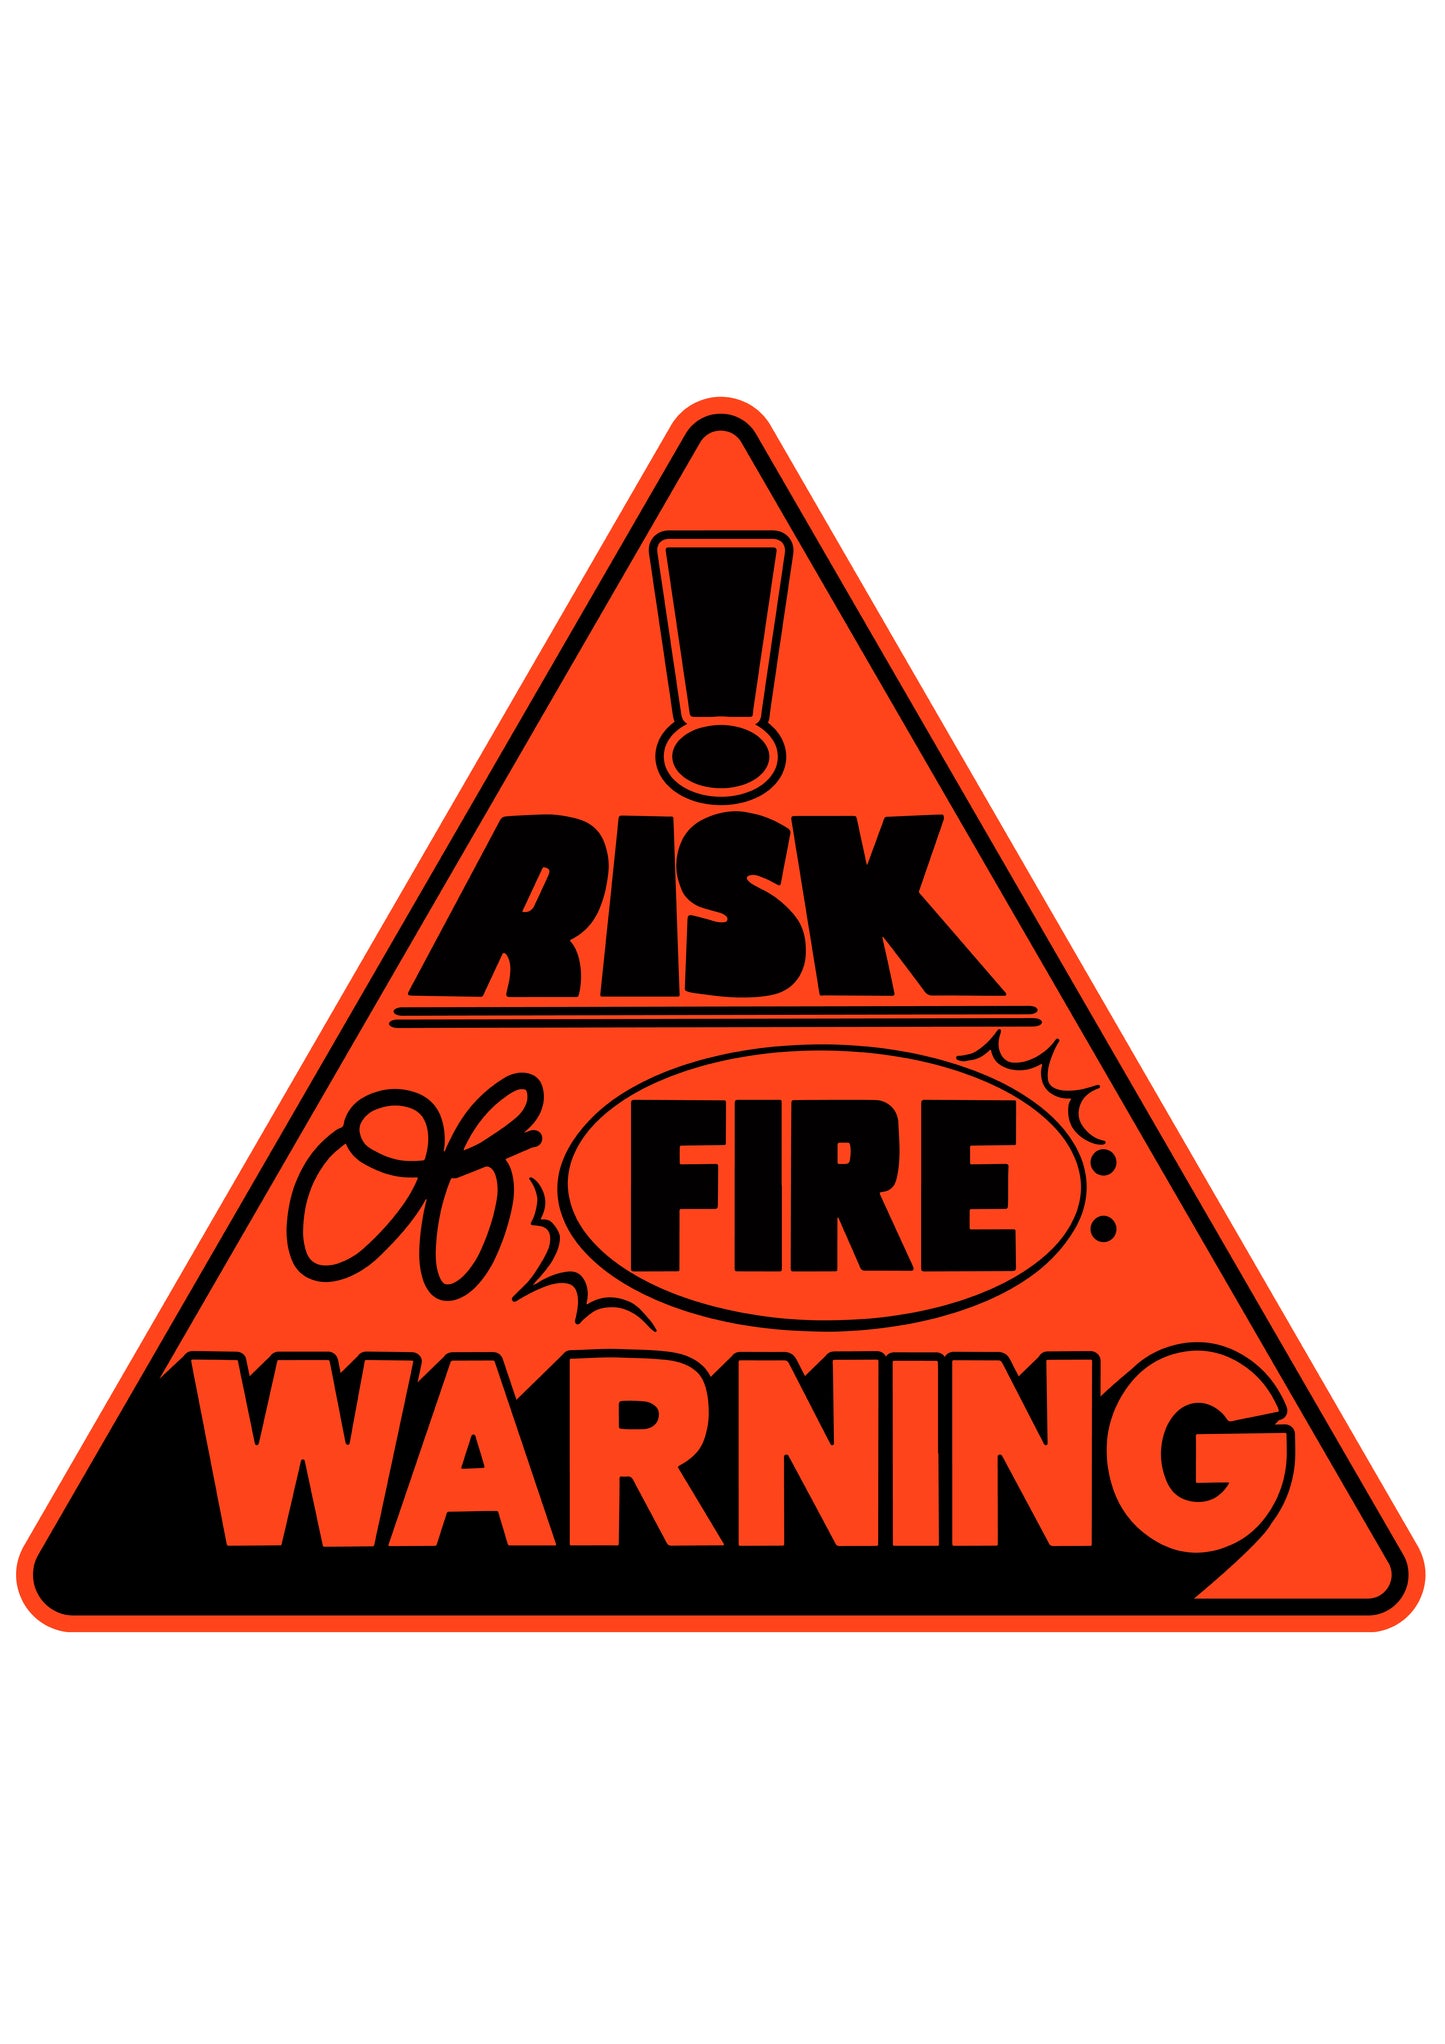 WARNING: Risk of Fire Pictogram by Jasmin Sehra